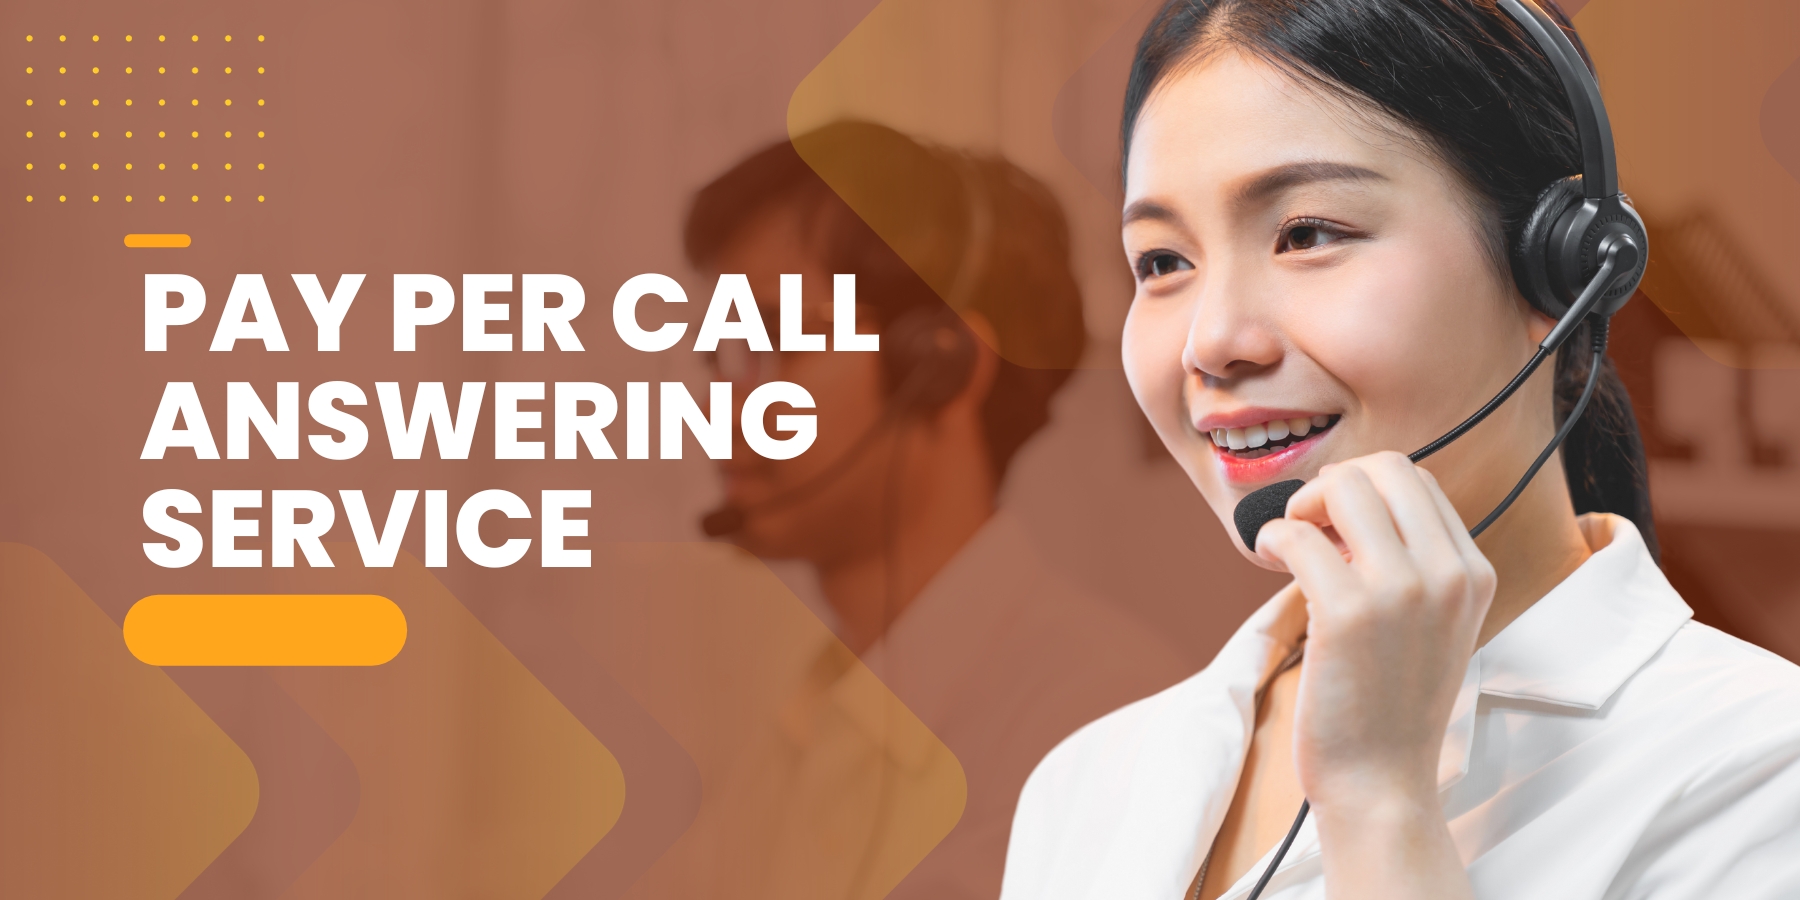 Pay Per Call Answering Service